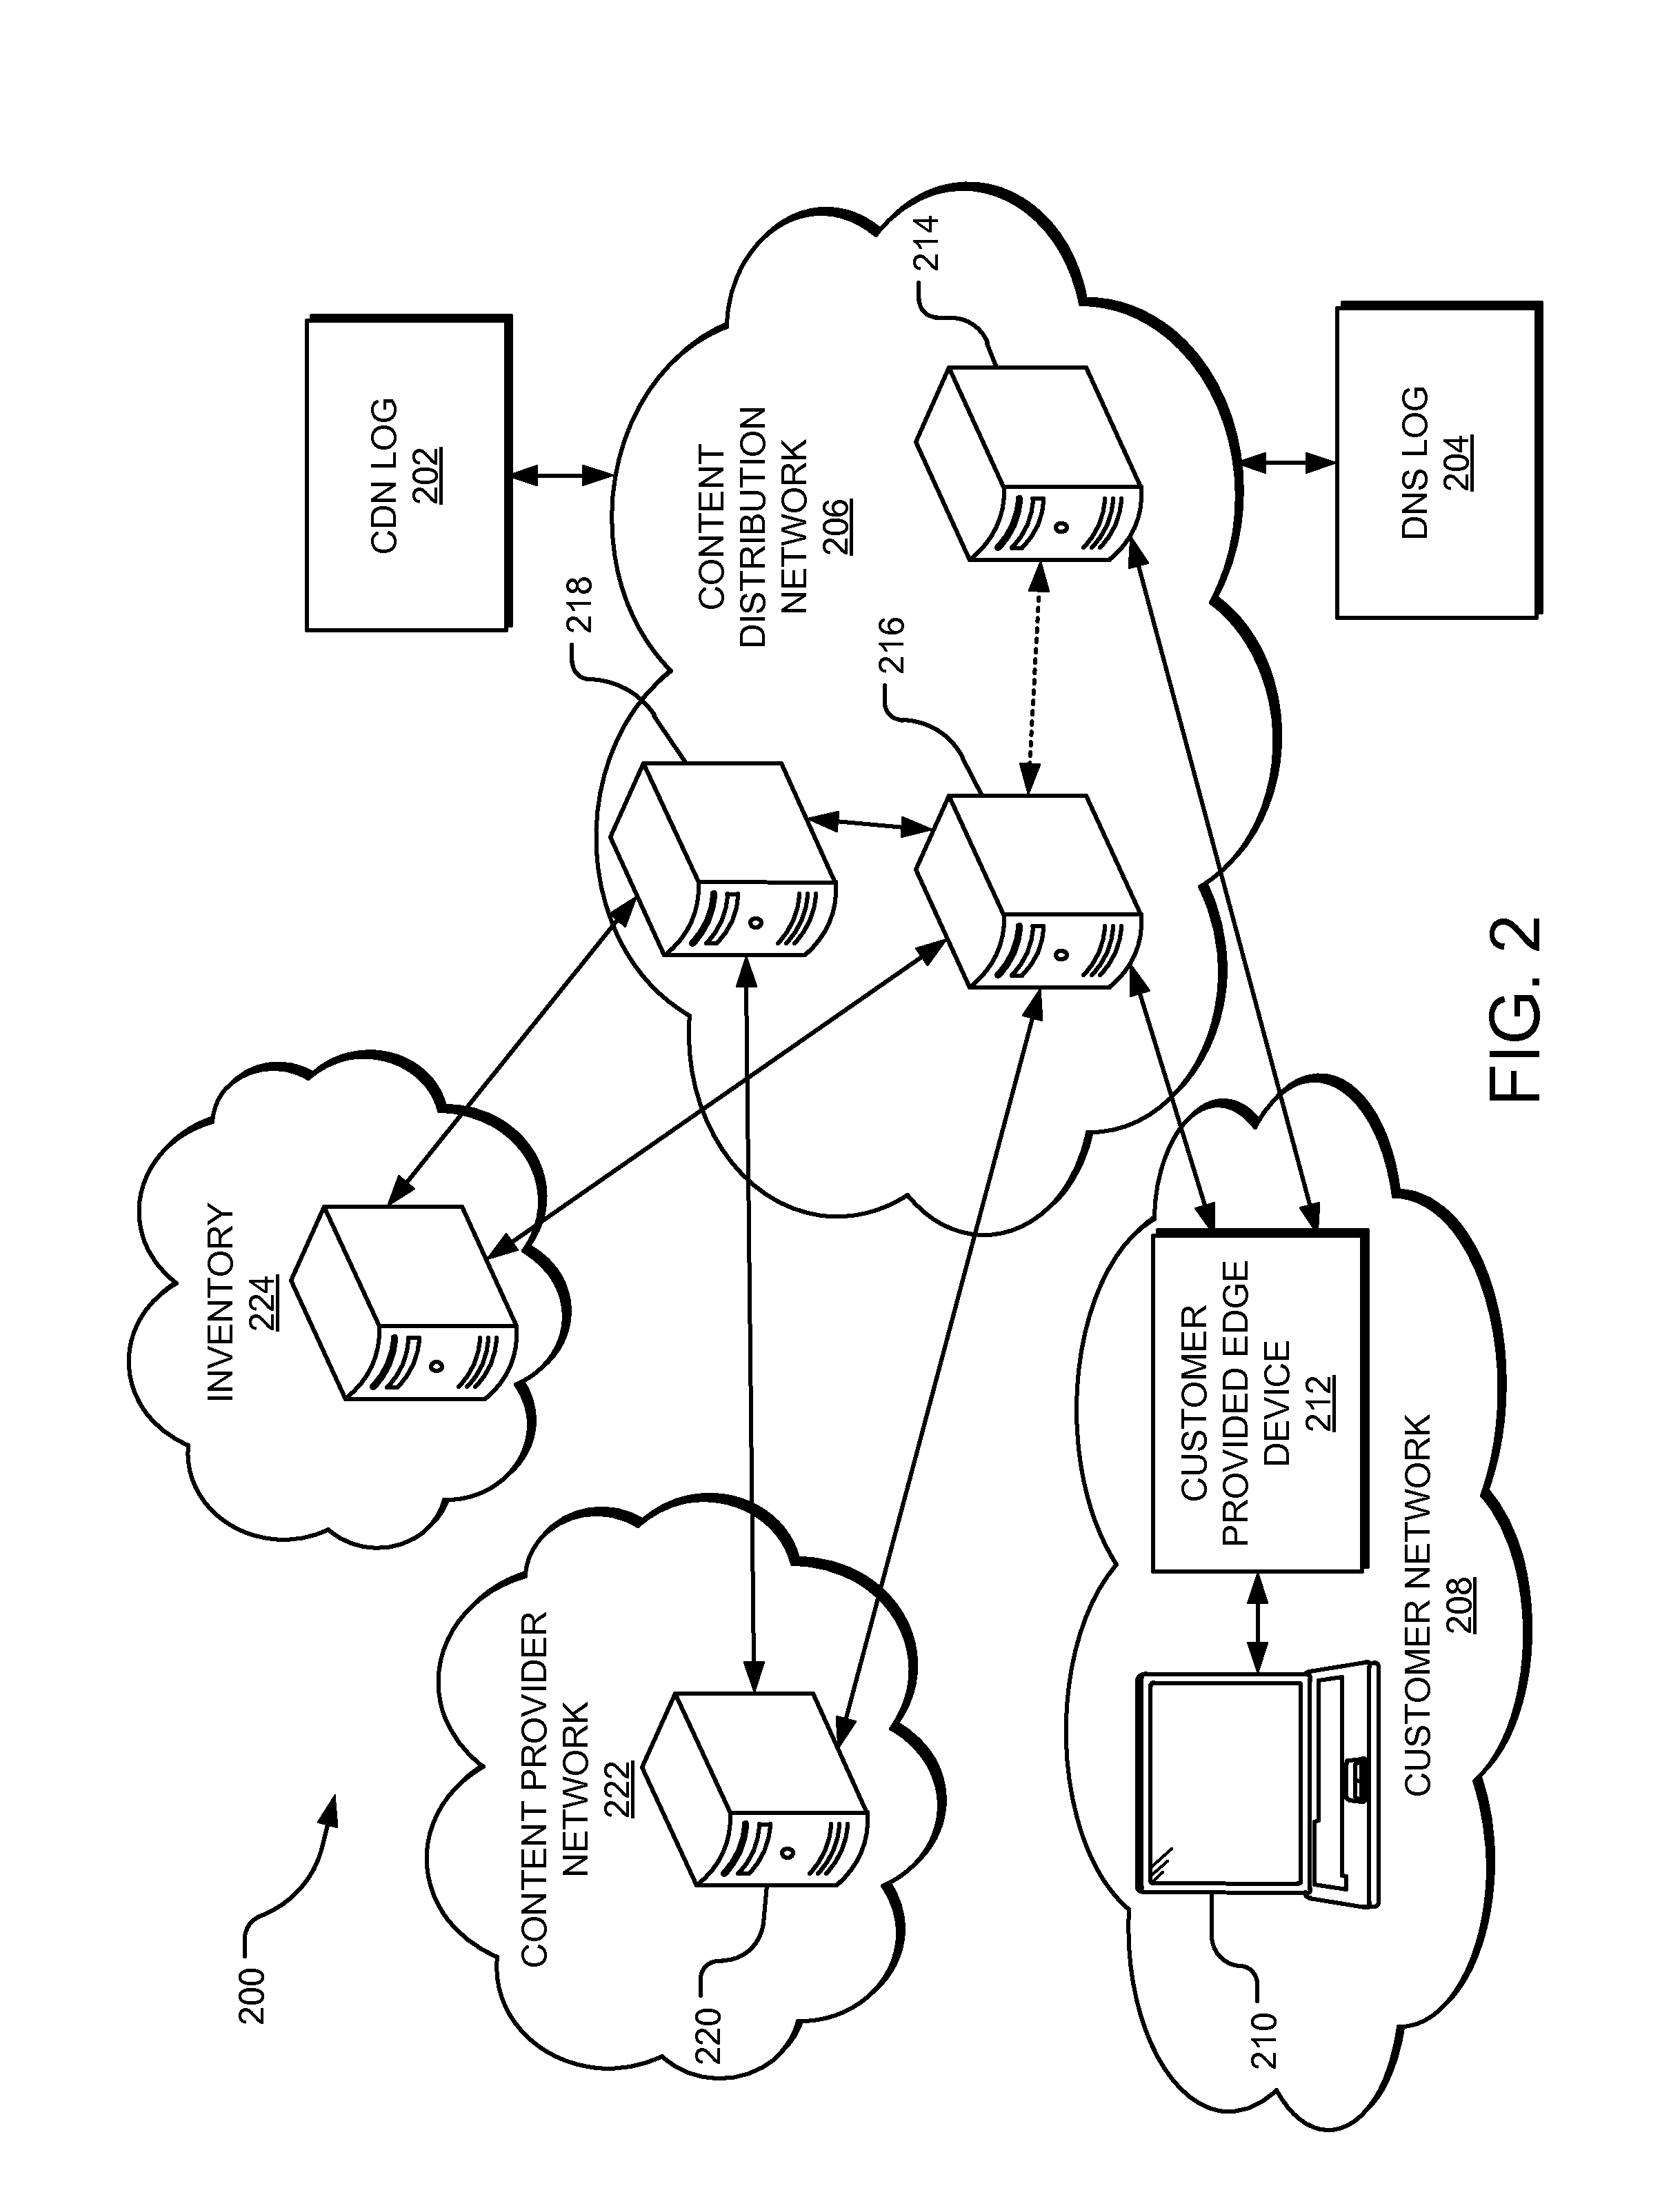 Systems and methods for generating network intelligence through real-time analytics